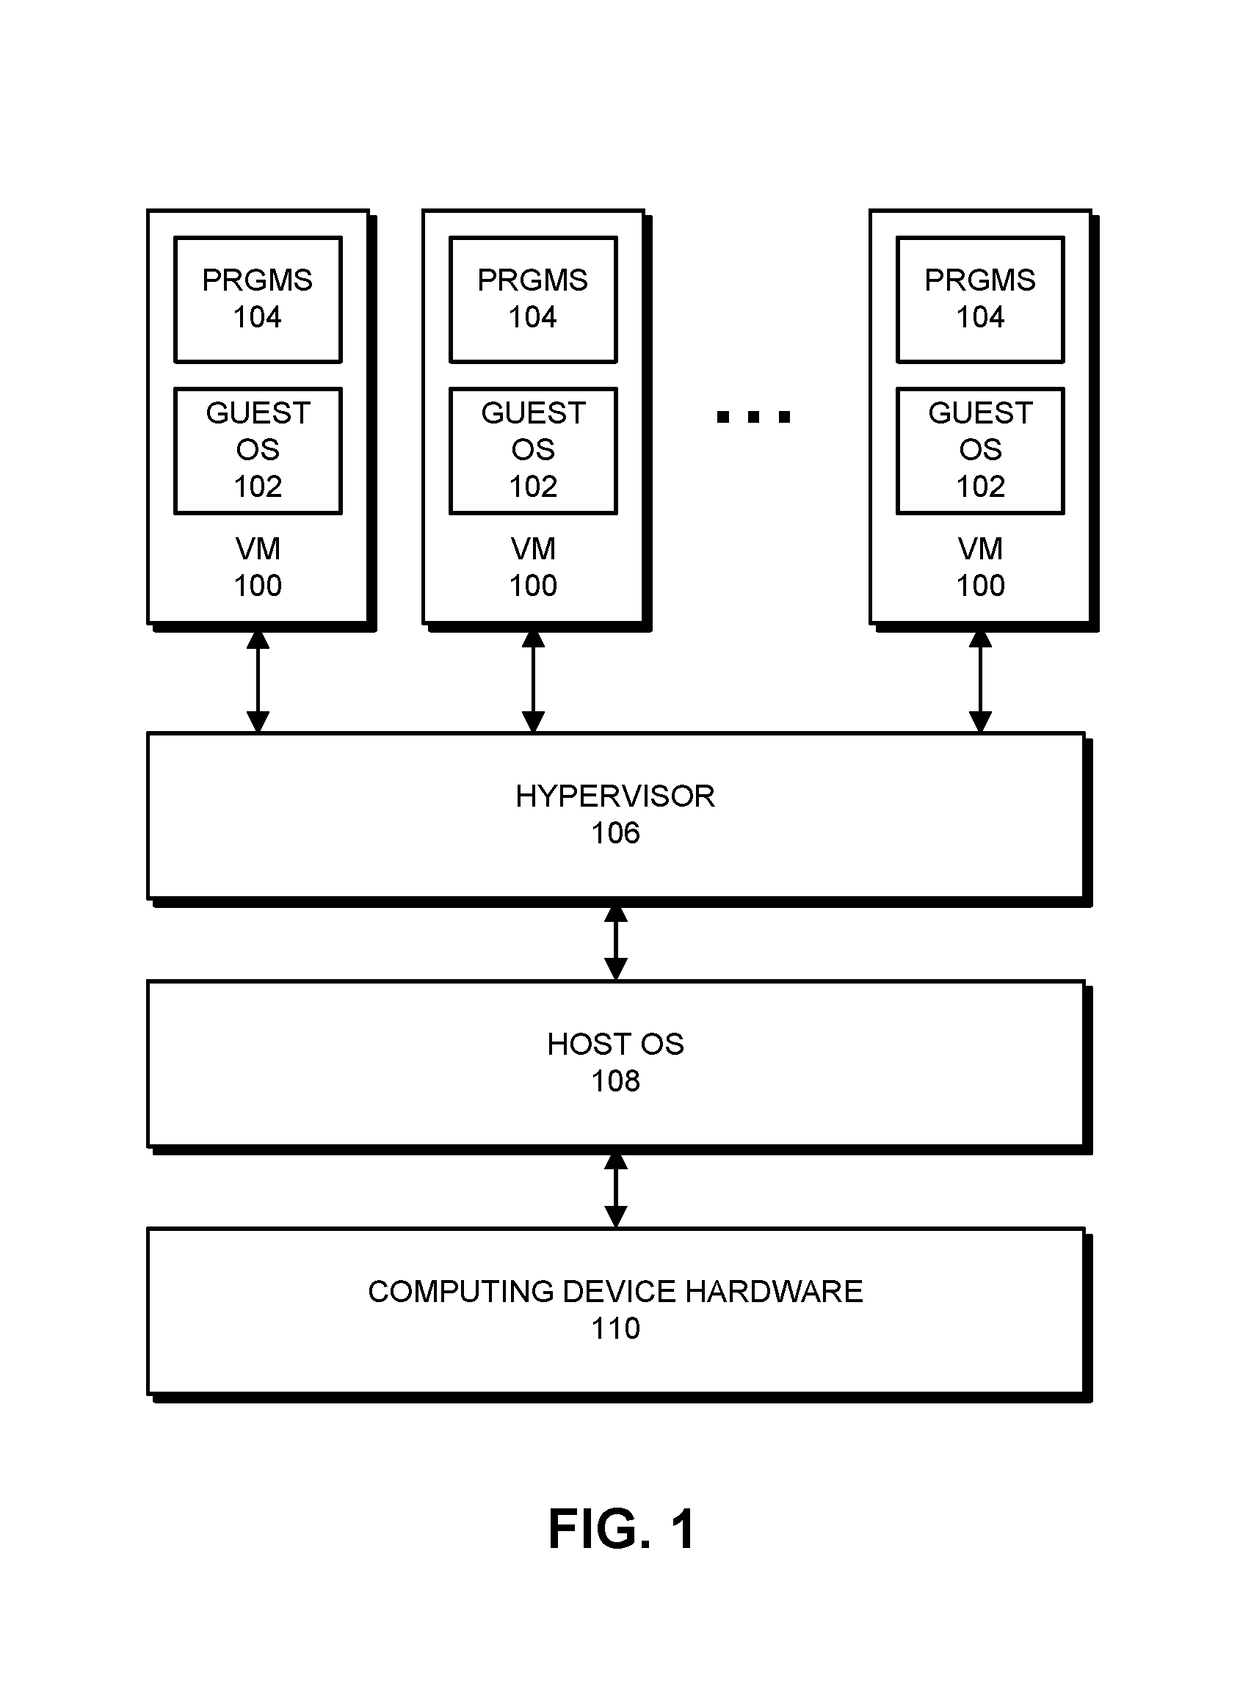 Controlling Access to Pages in a Memory in a Computing Device